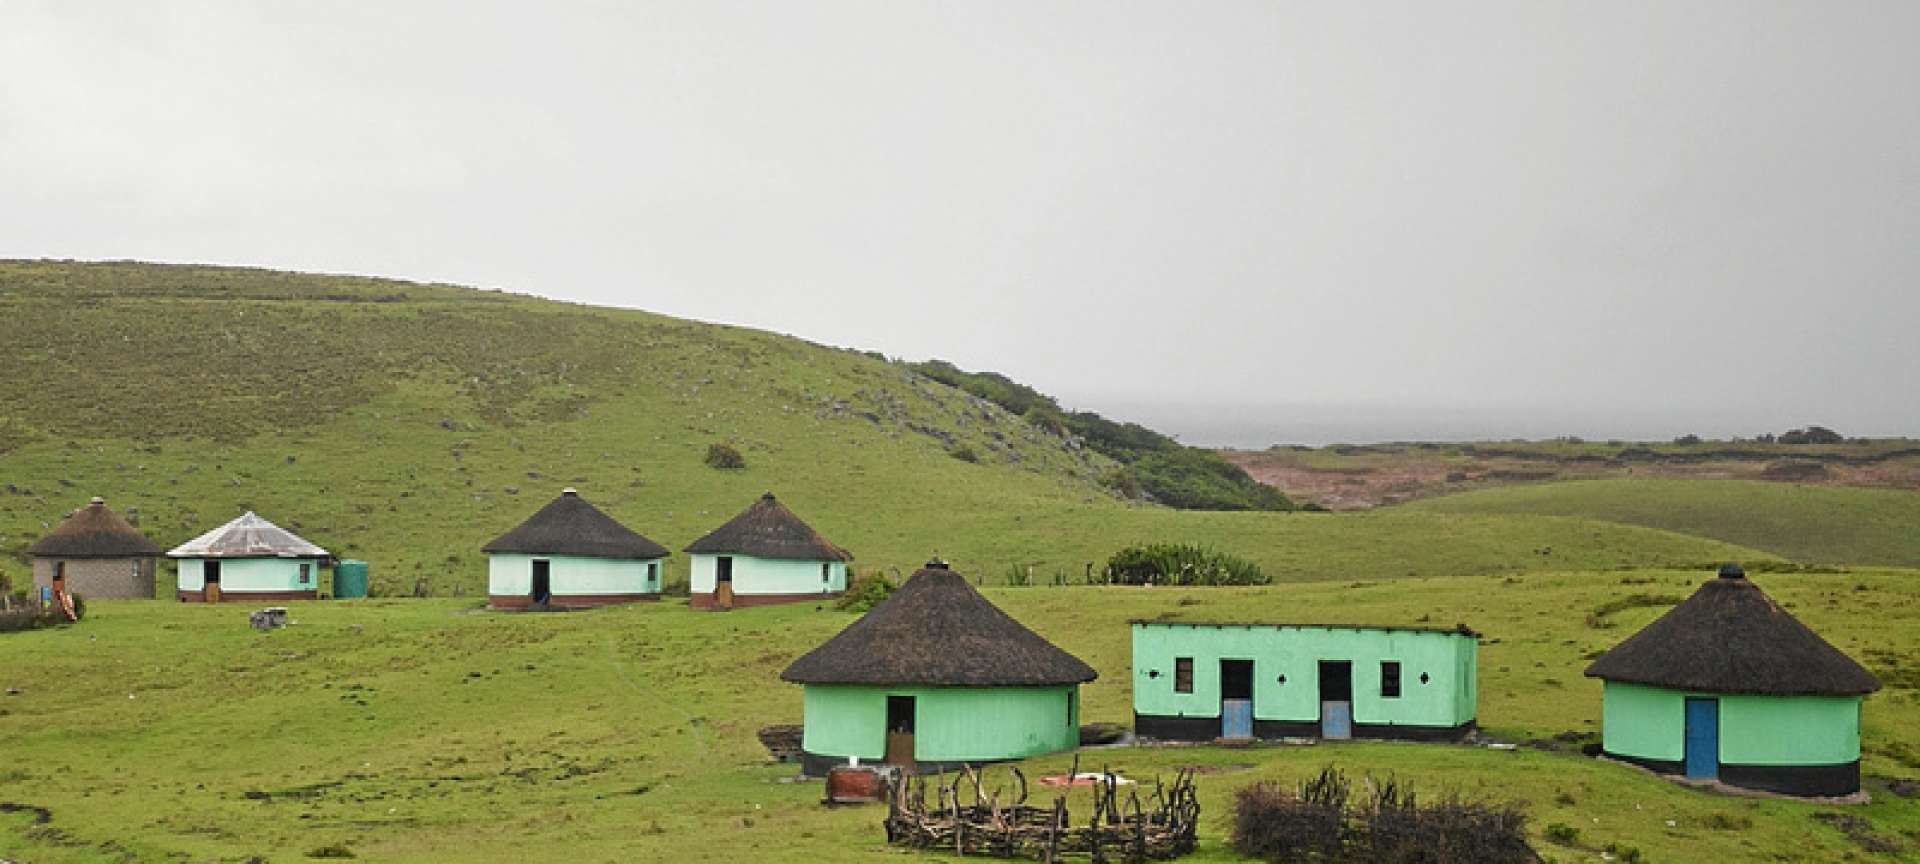 Villages in Eastern Cape